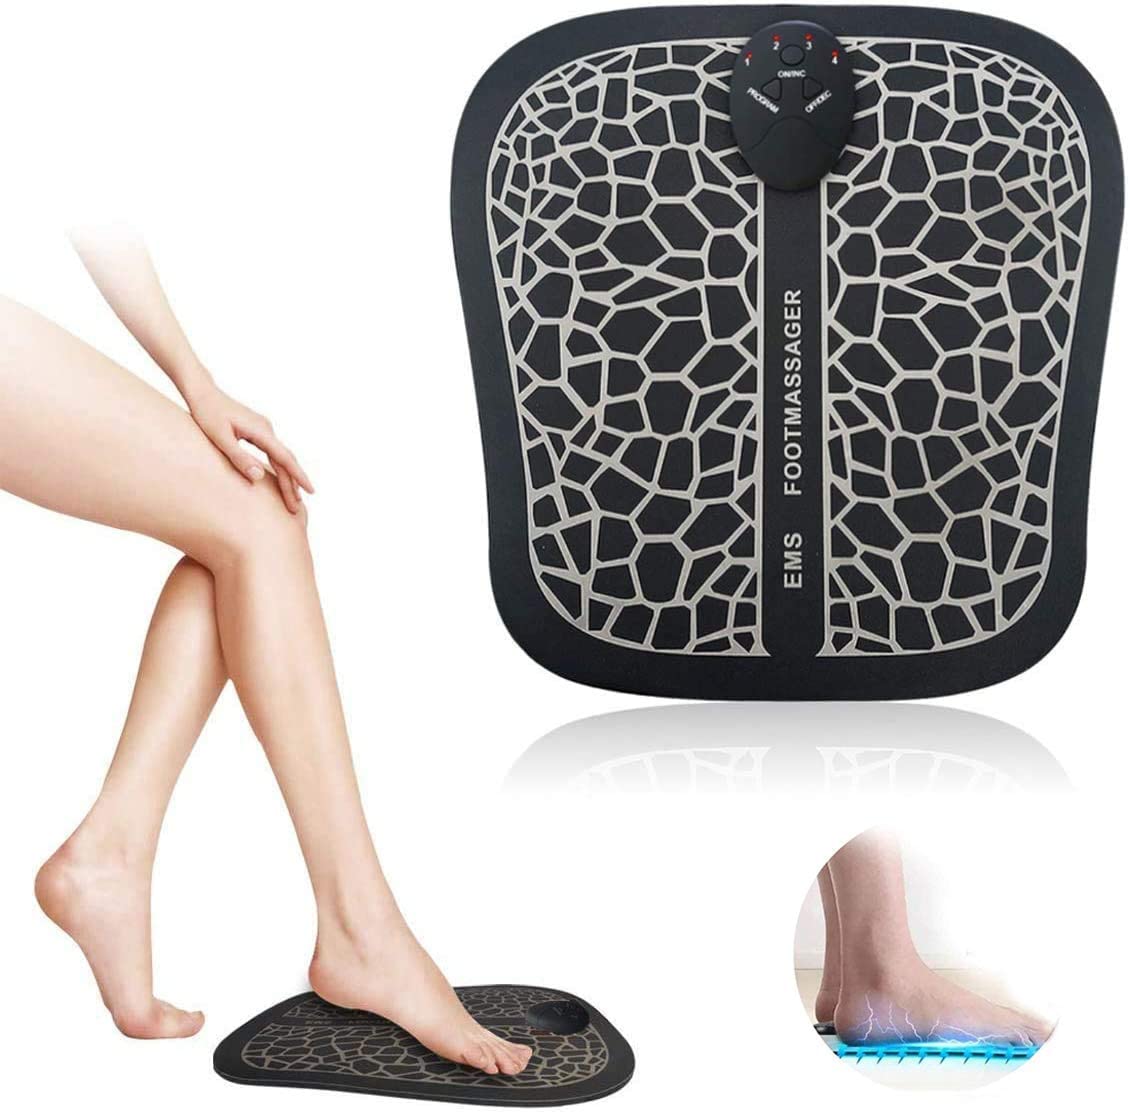 ROOTOK EMS Foot Massager Electric Foot Massage Cushion, Foot Massager EMS Muscle Stimulator, 6 Modes and 10 Intensities for Improving Circulation, Pain Relief